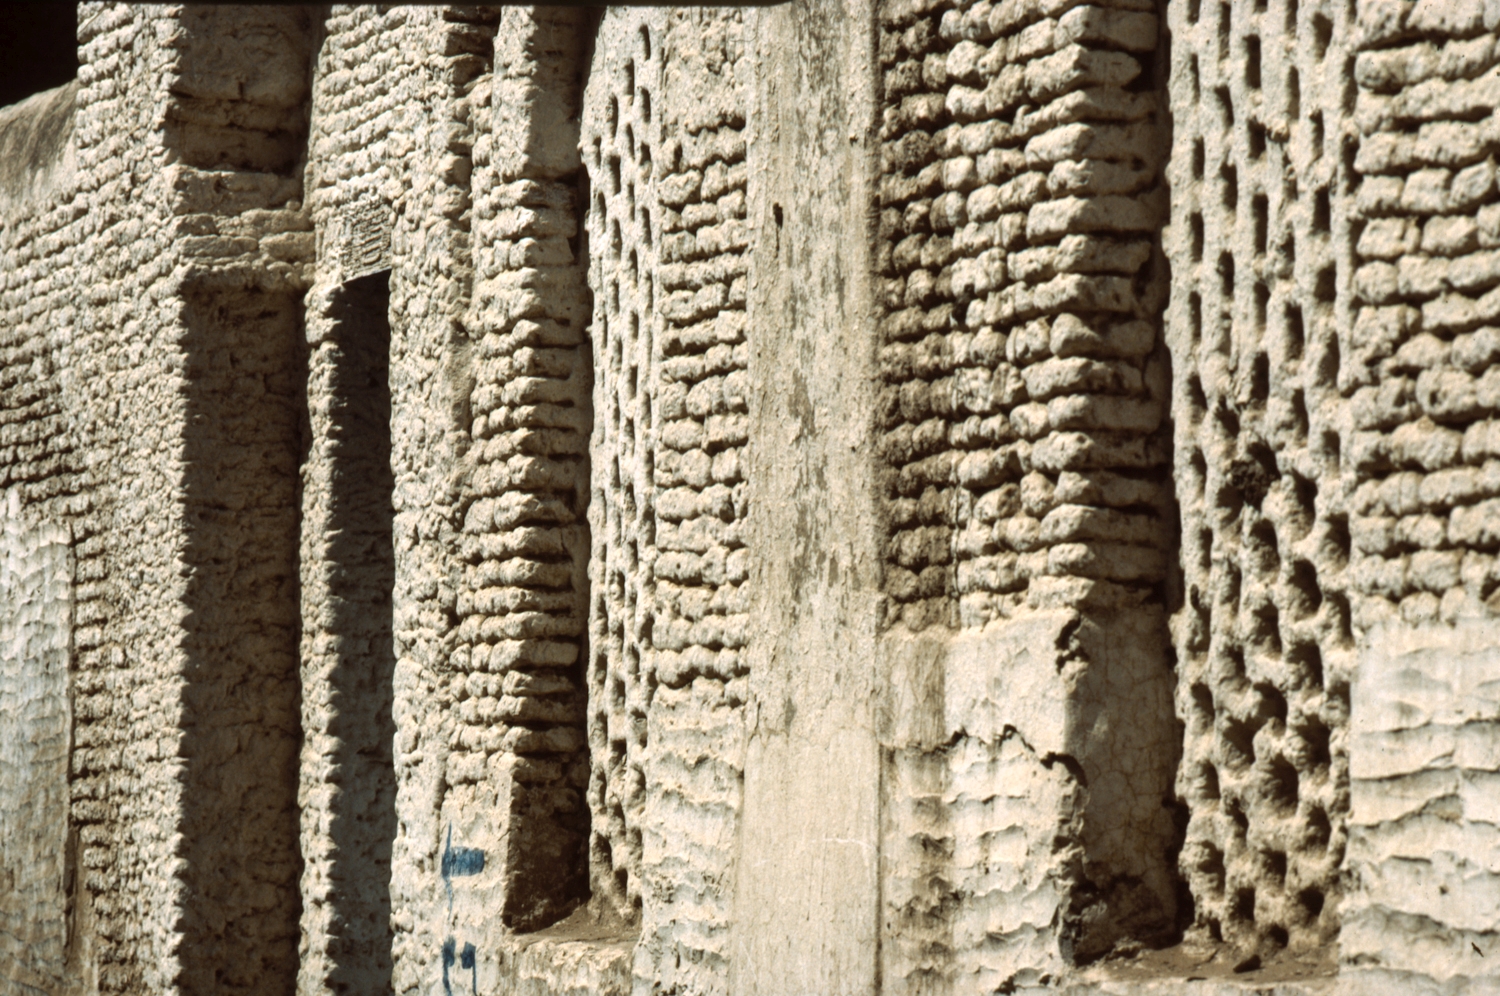 Zabid. Exterior view of an unidentified building.